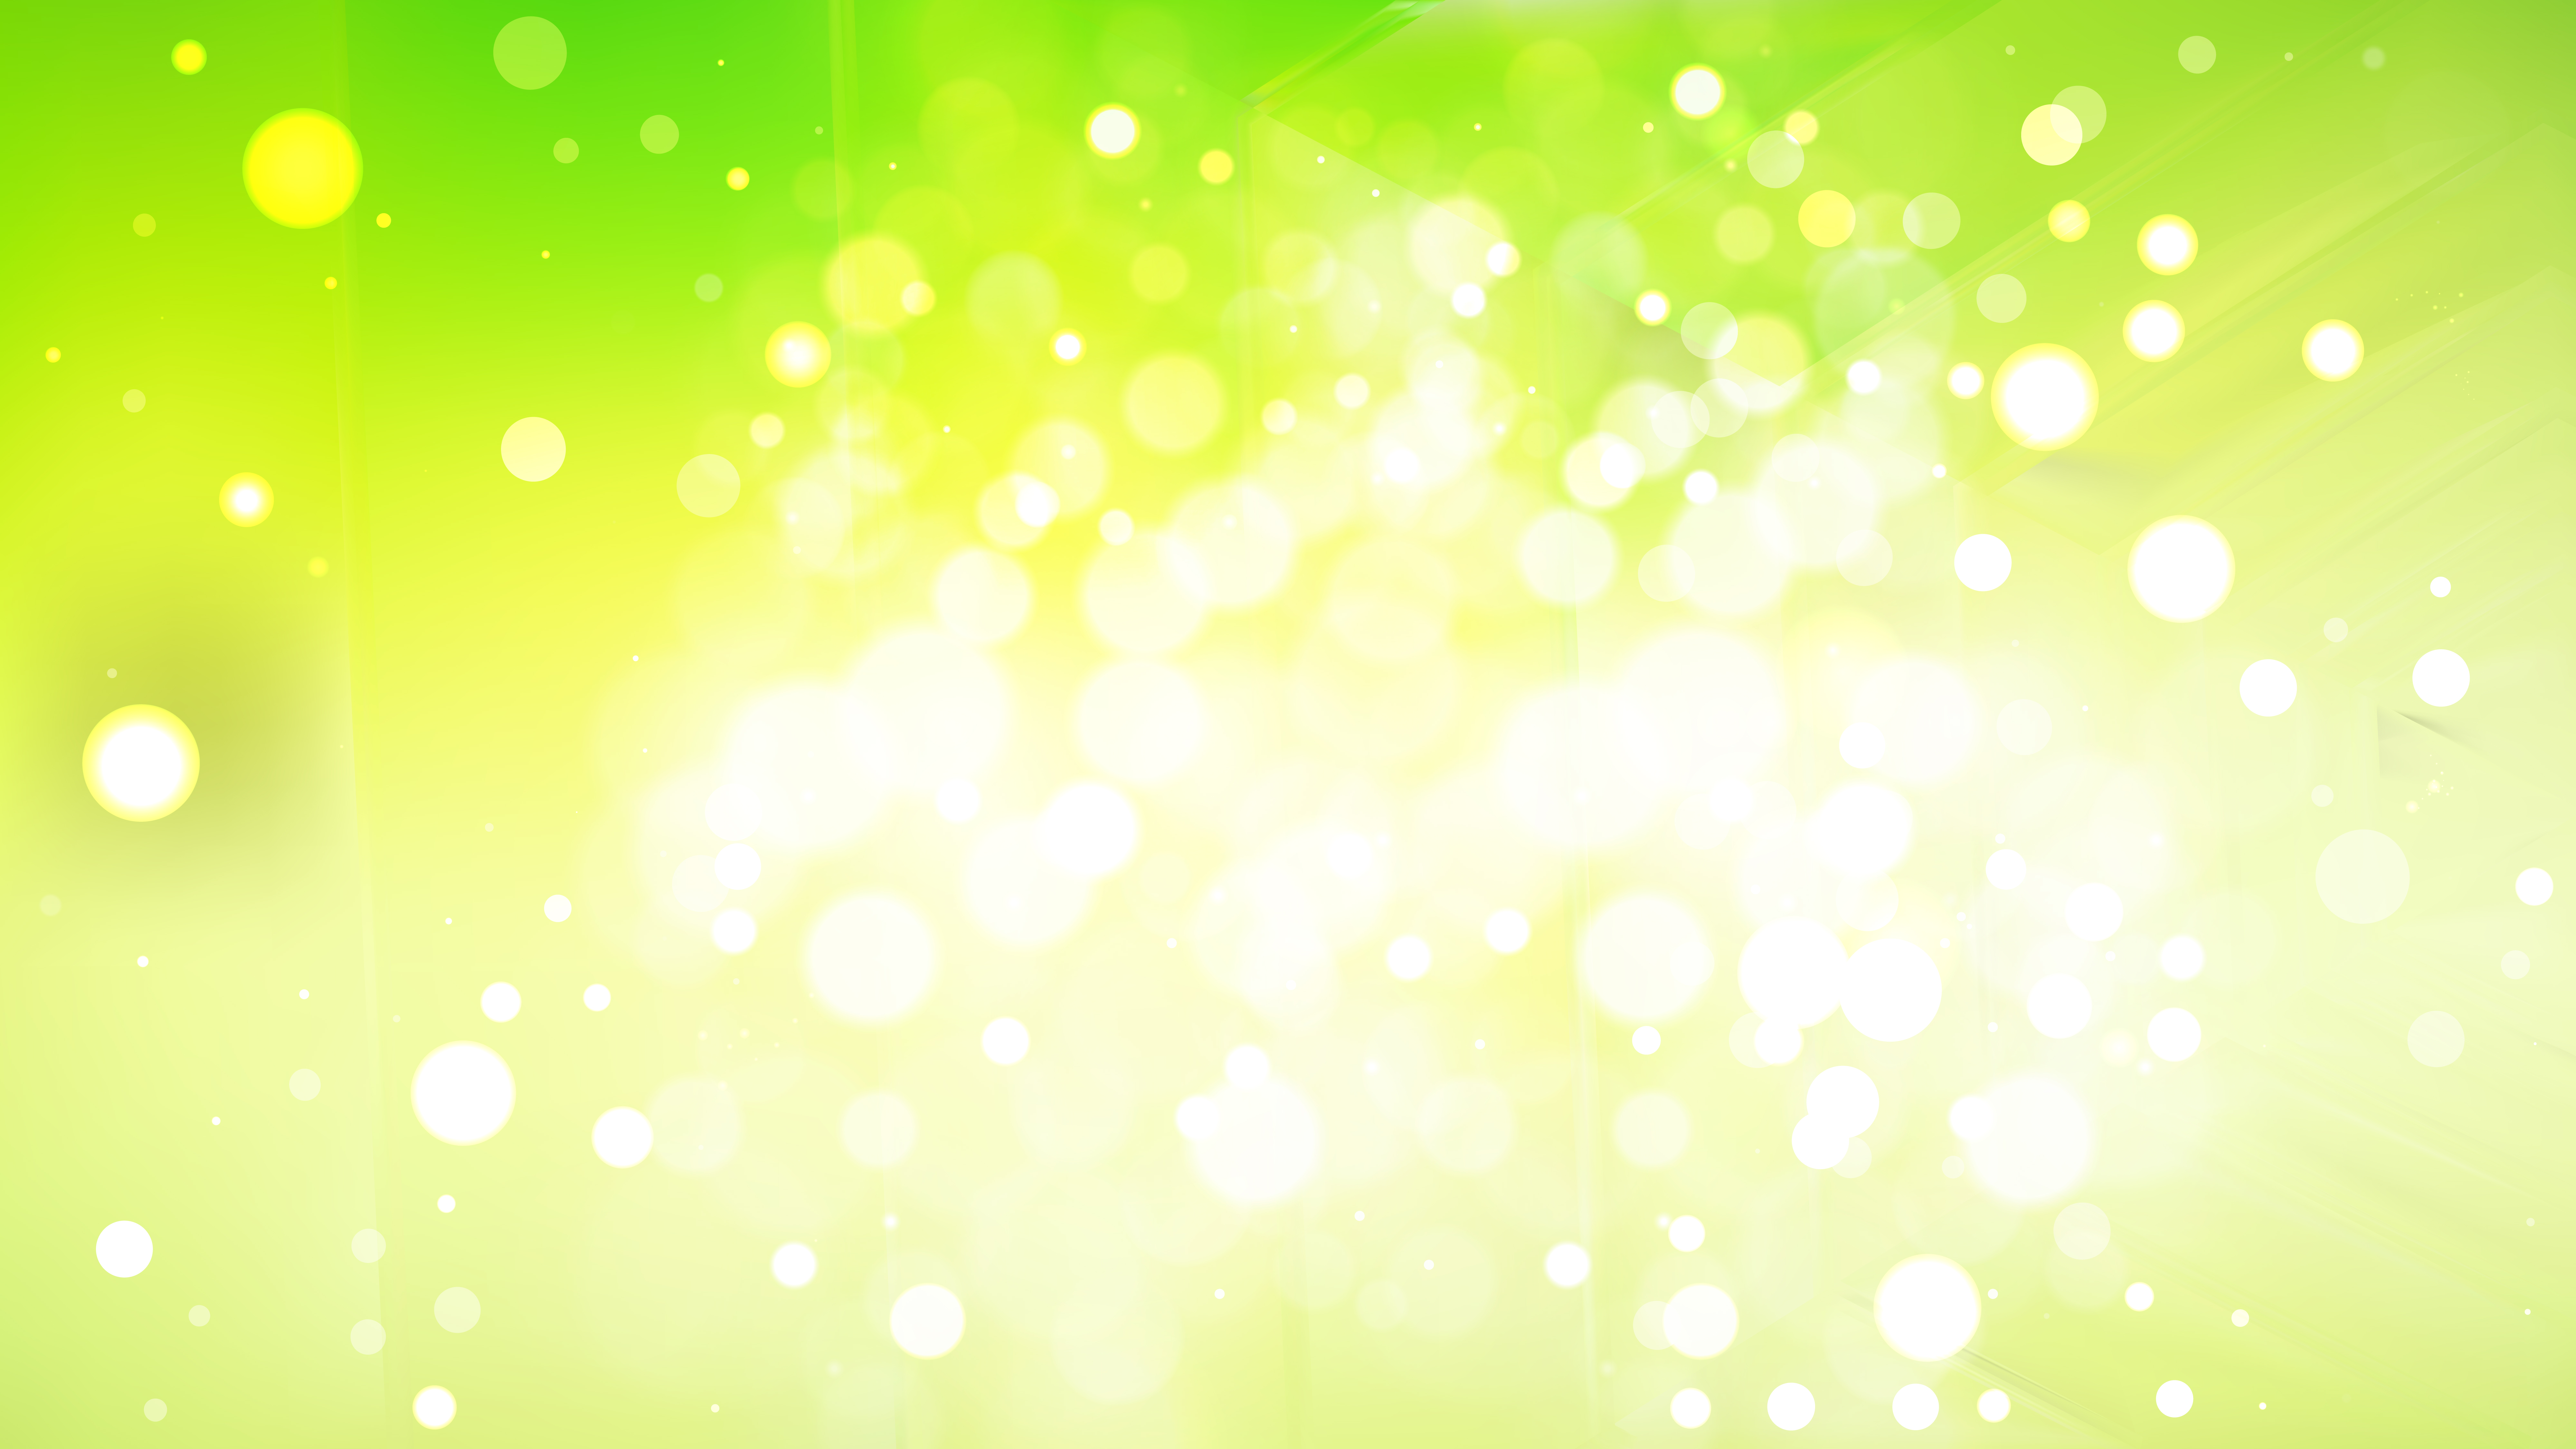 Abstract Green And Yellow Defocused Background Design